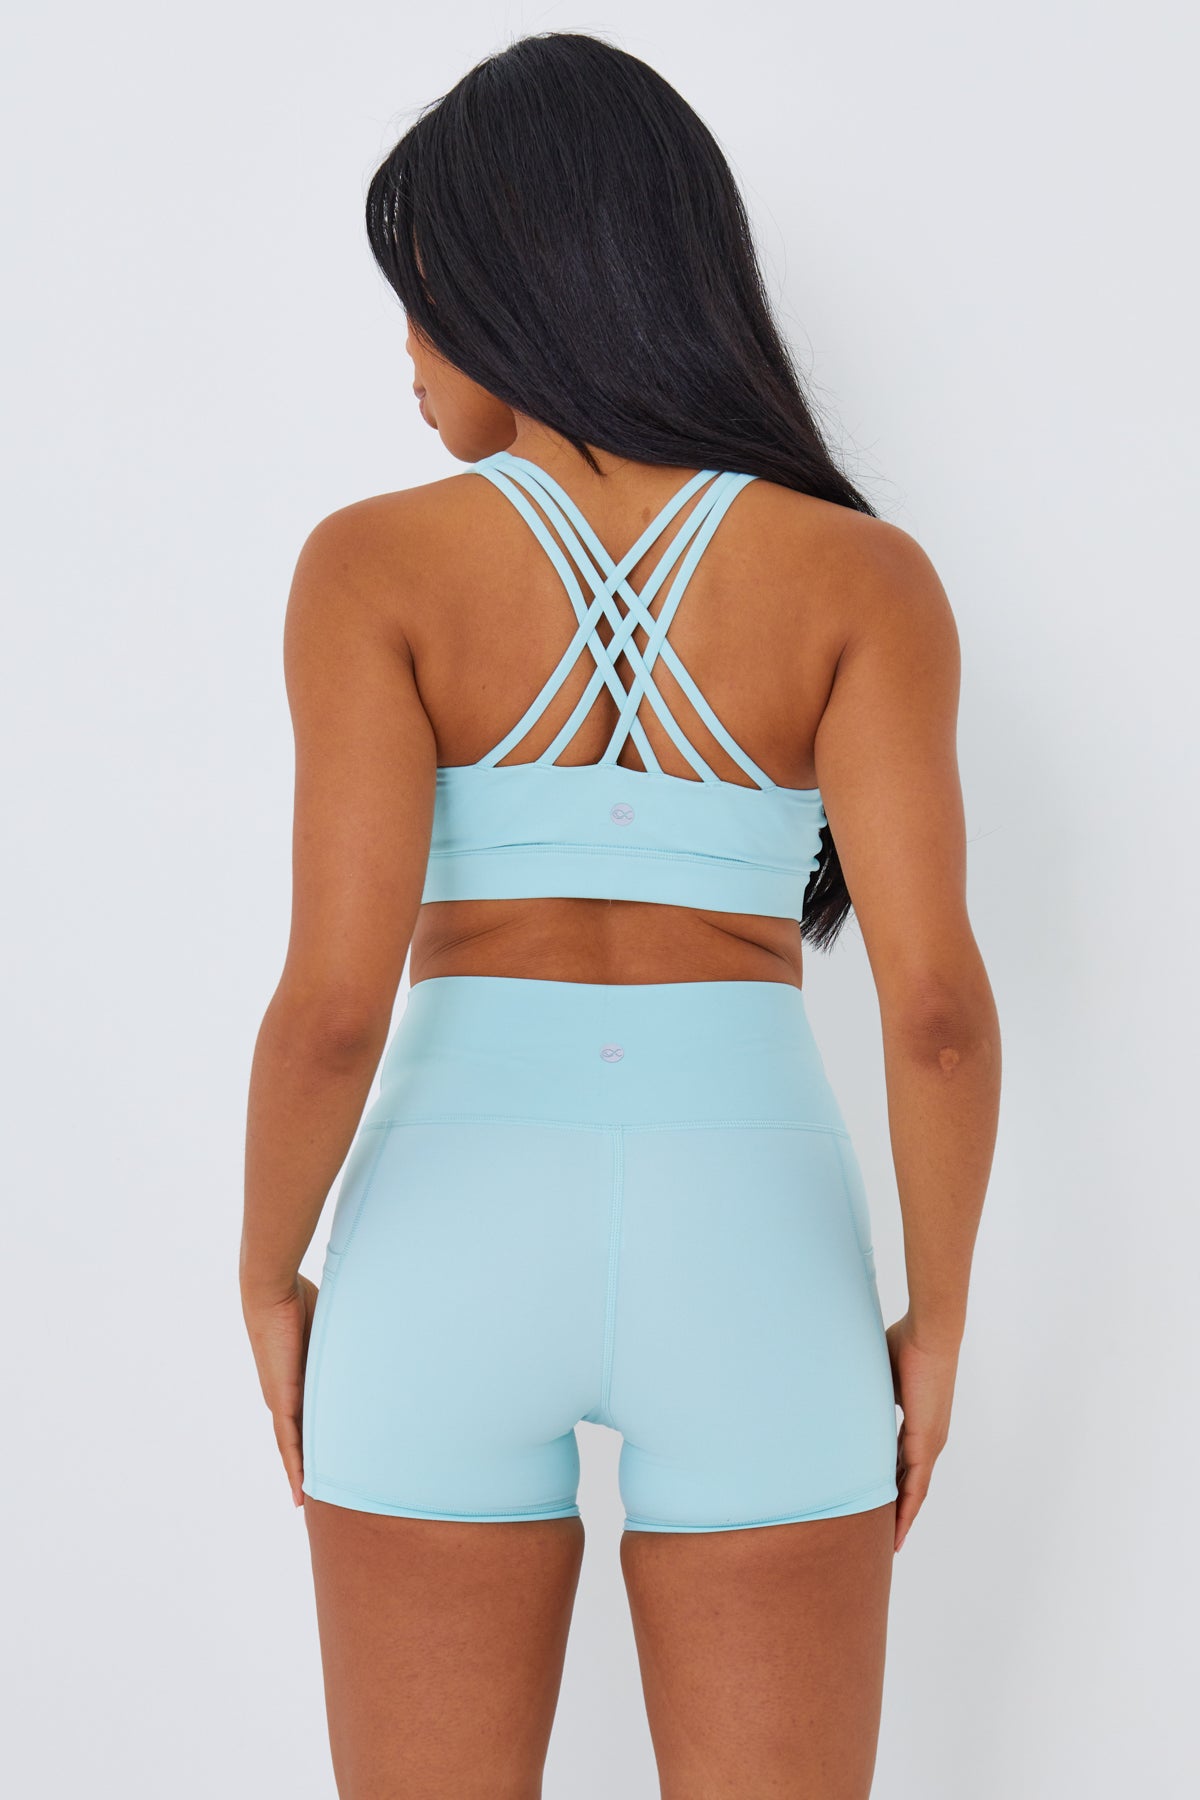 Women's Collection – Southern Athletica